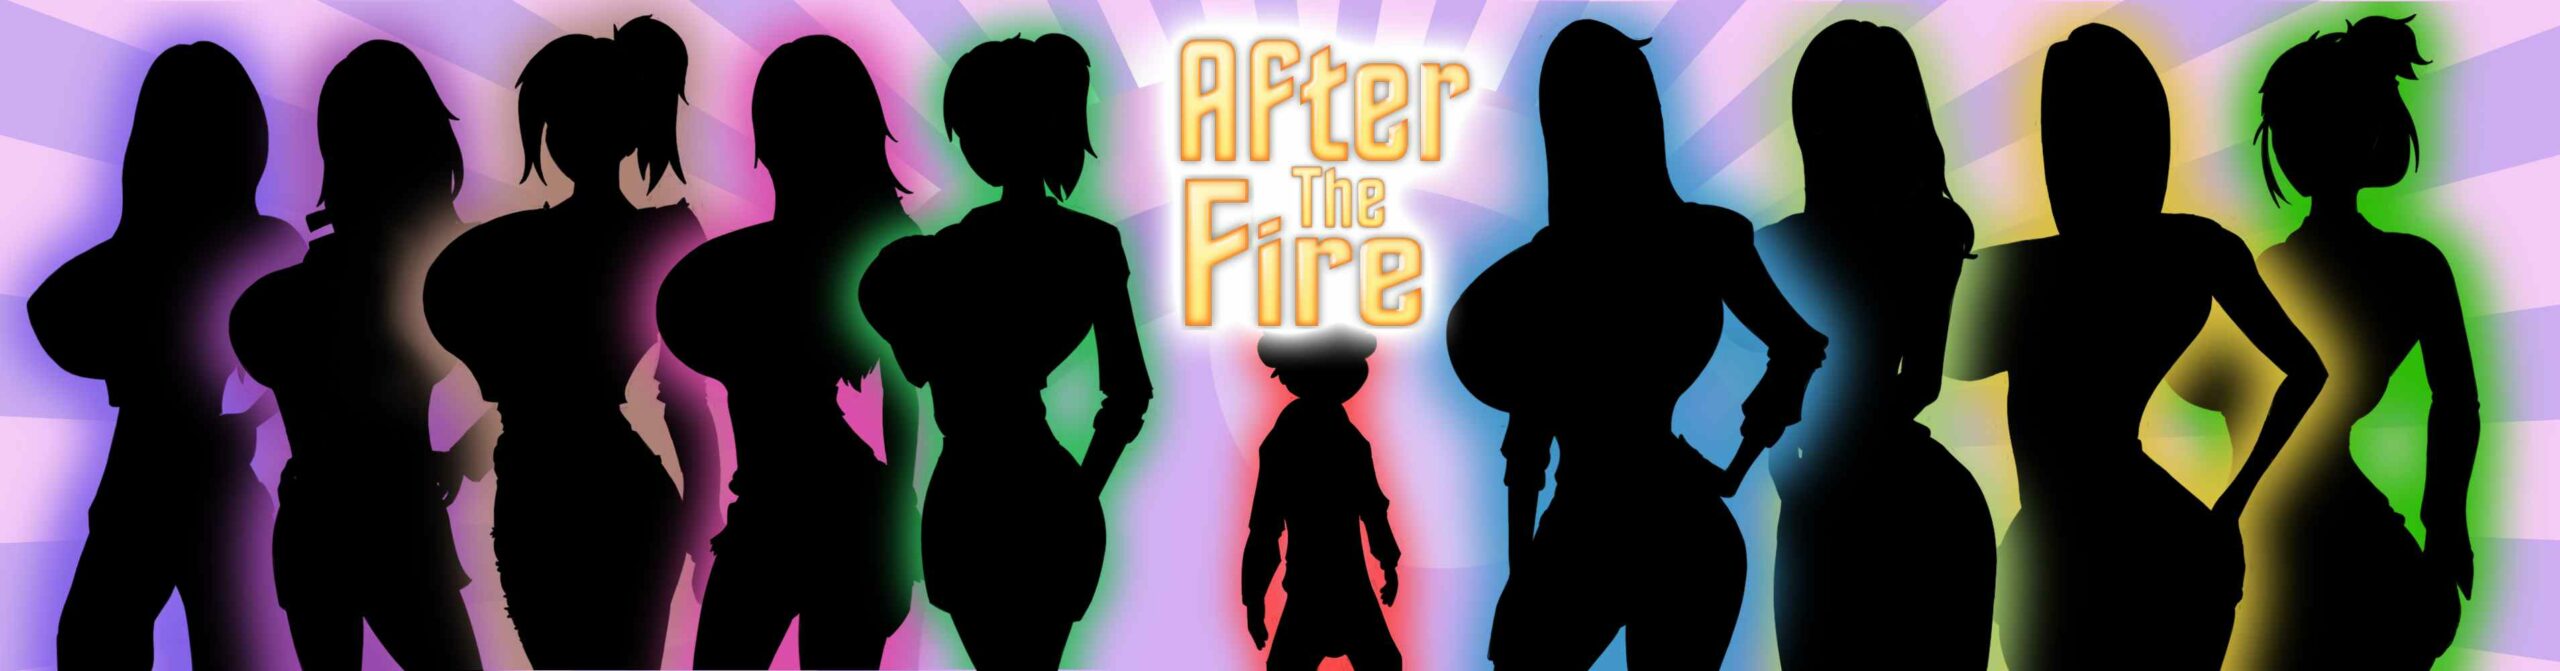 After the Fire [Captain Doctor] Adult xxx Game Download